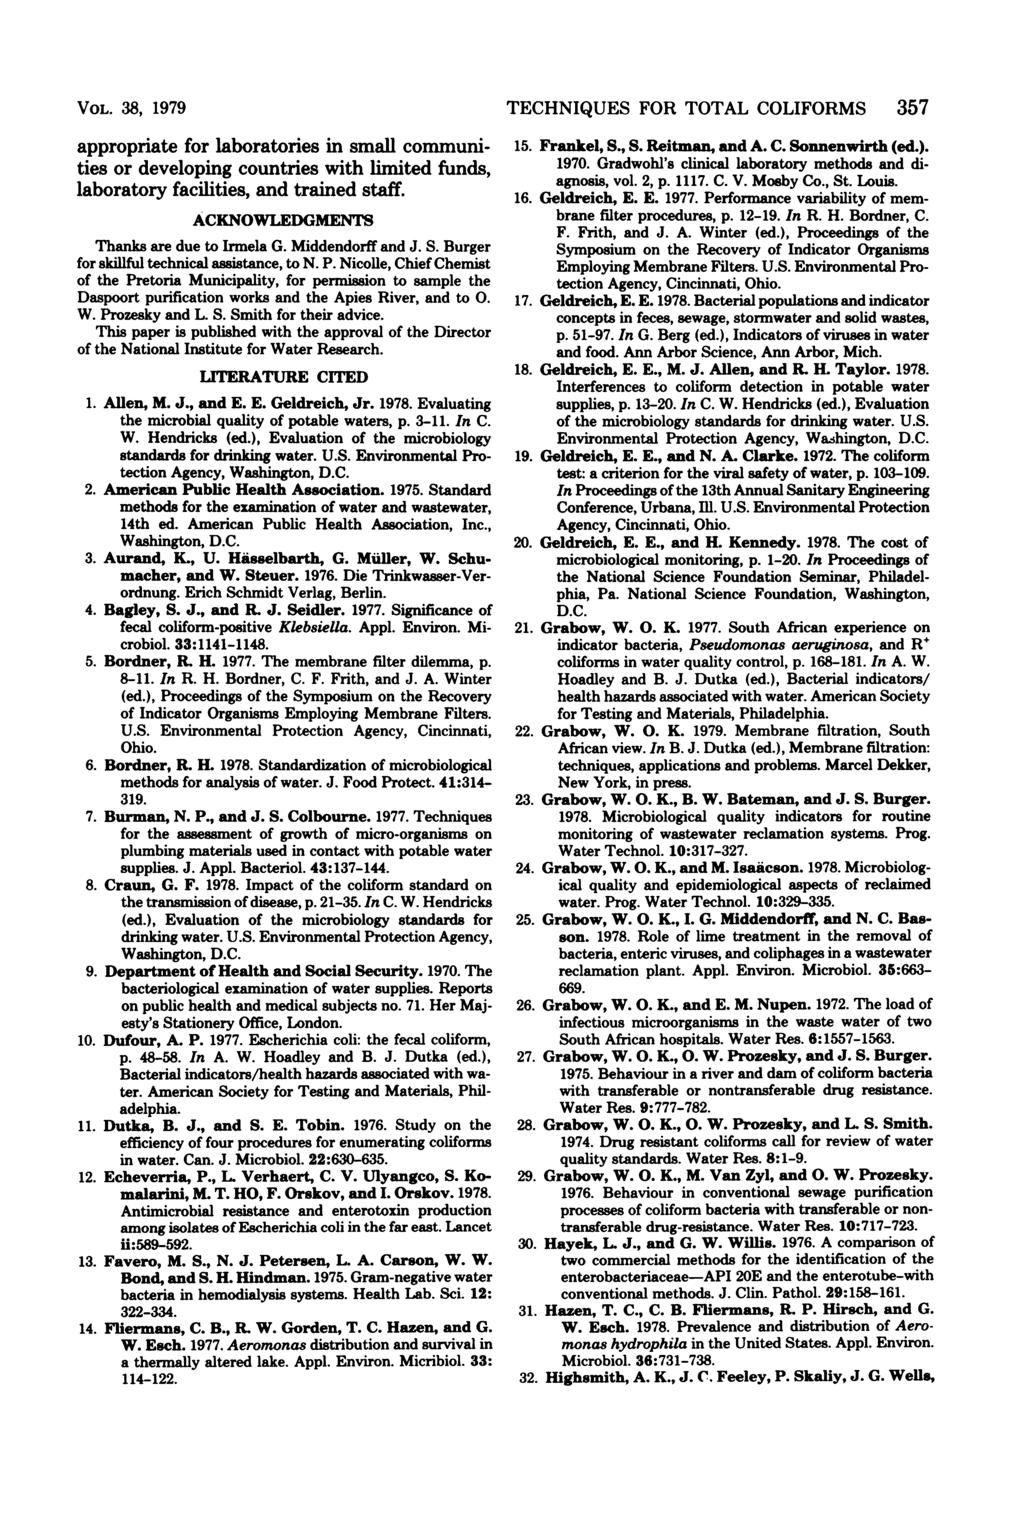 VOL. 38, 1979 appropriate for laboratories in small communities or developing countries with limited funds, laboratory facilities, and trained staff. ACKNOWLEDGMENTS Thanks are due to Irmela G.